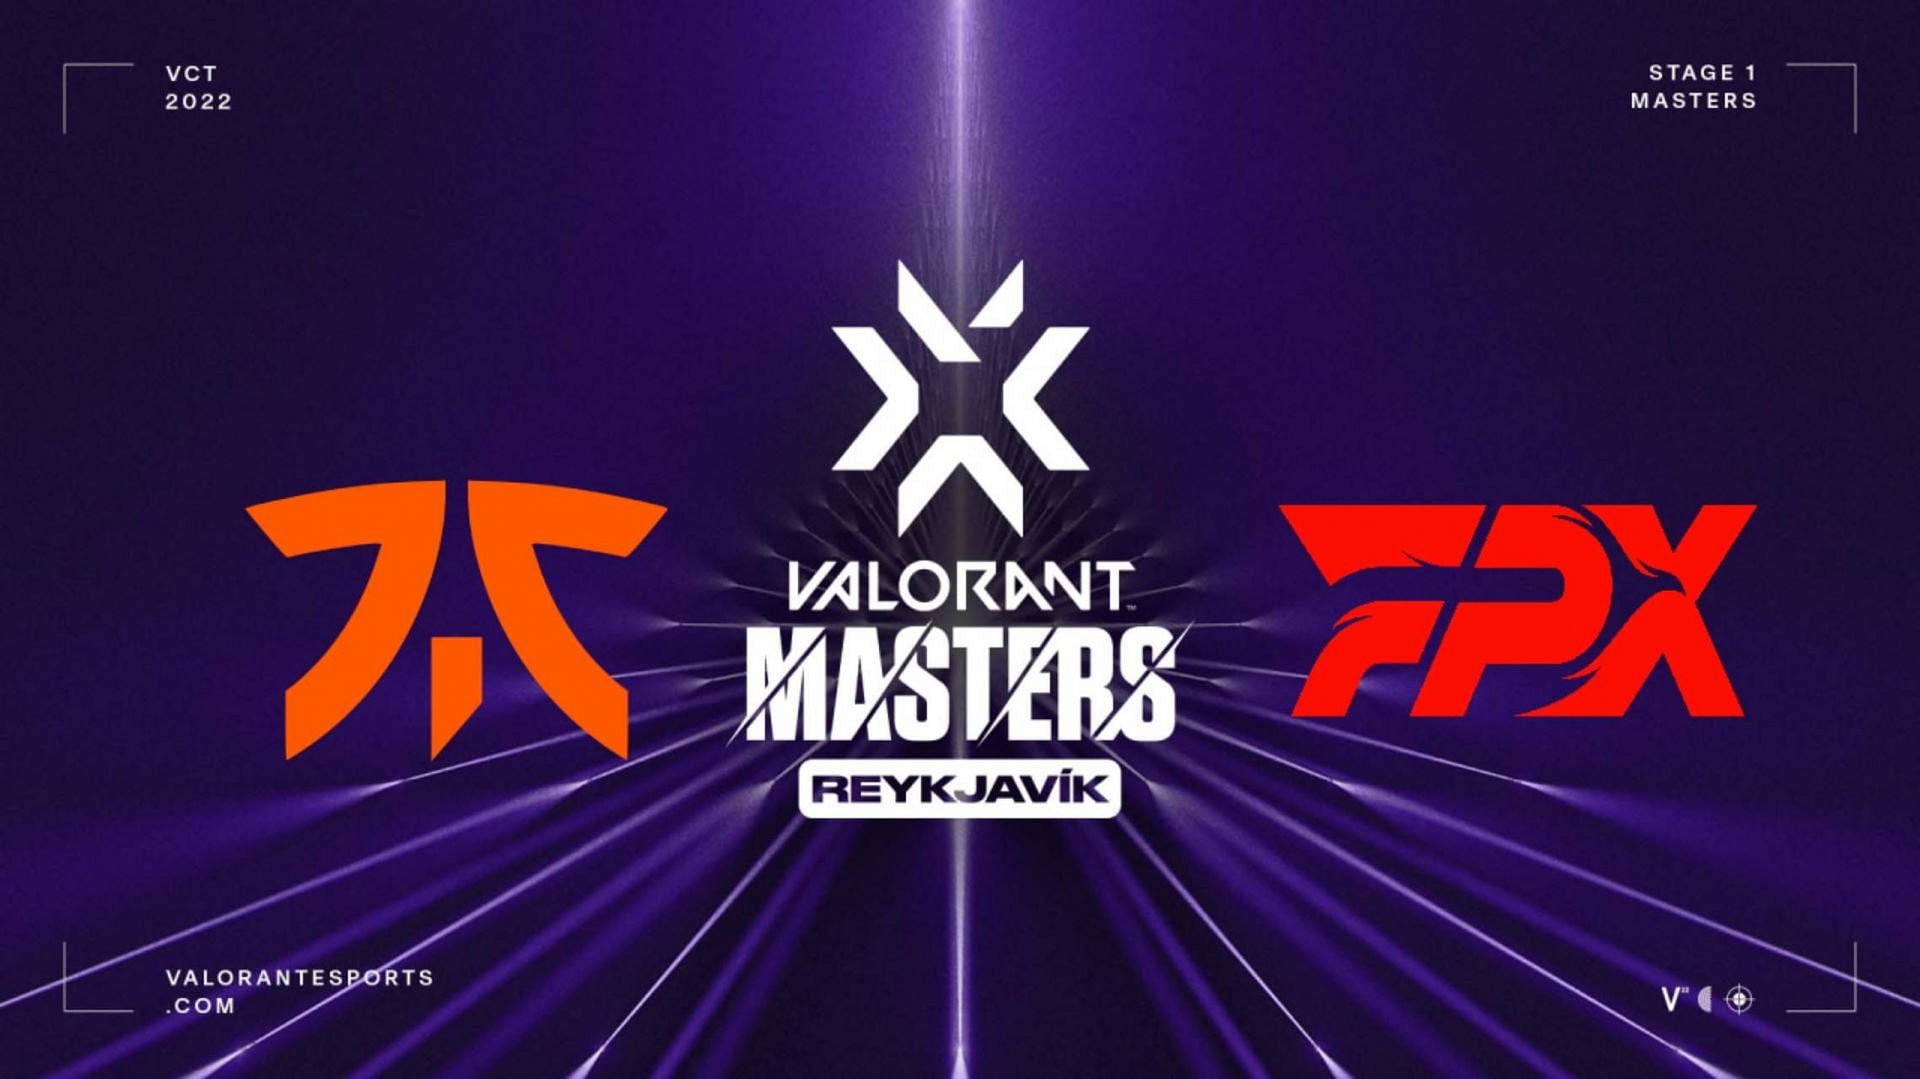 Fnatic and FunPlus Phoenix qualified for the VCT Stage-1 Masters Reykjavik (Image via Sportskeeda)